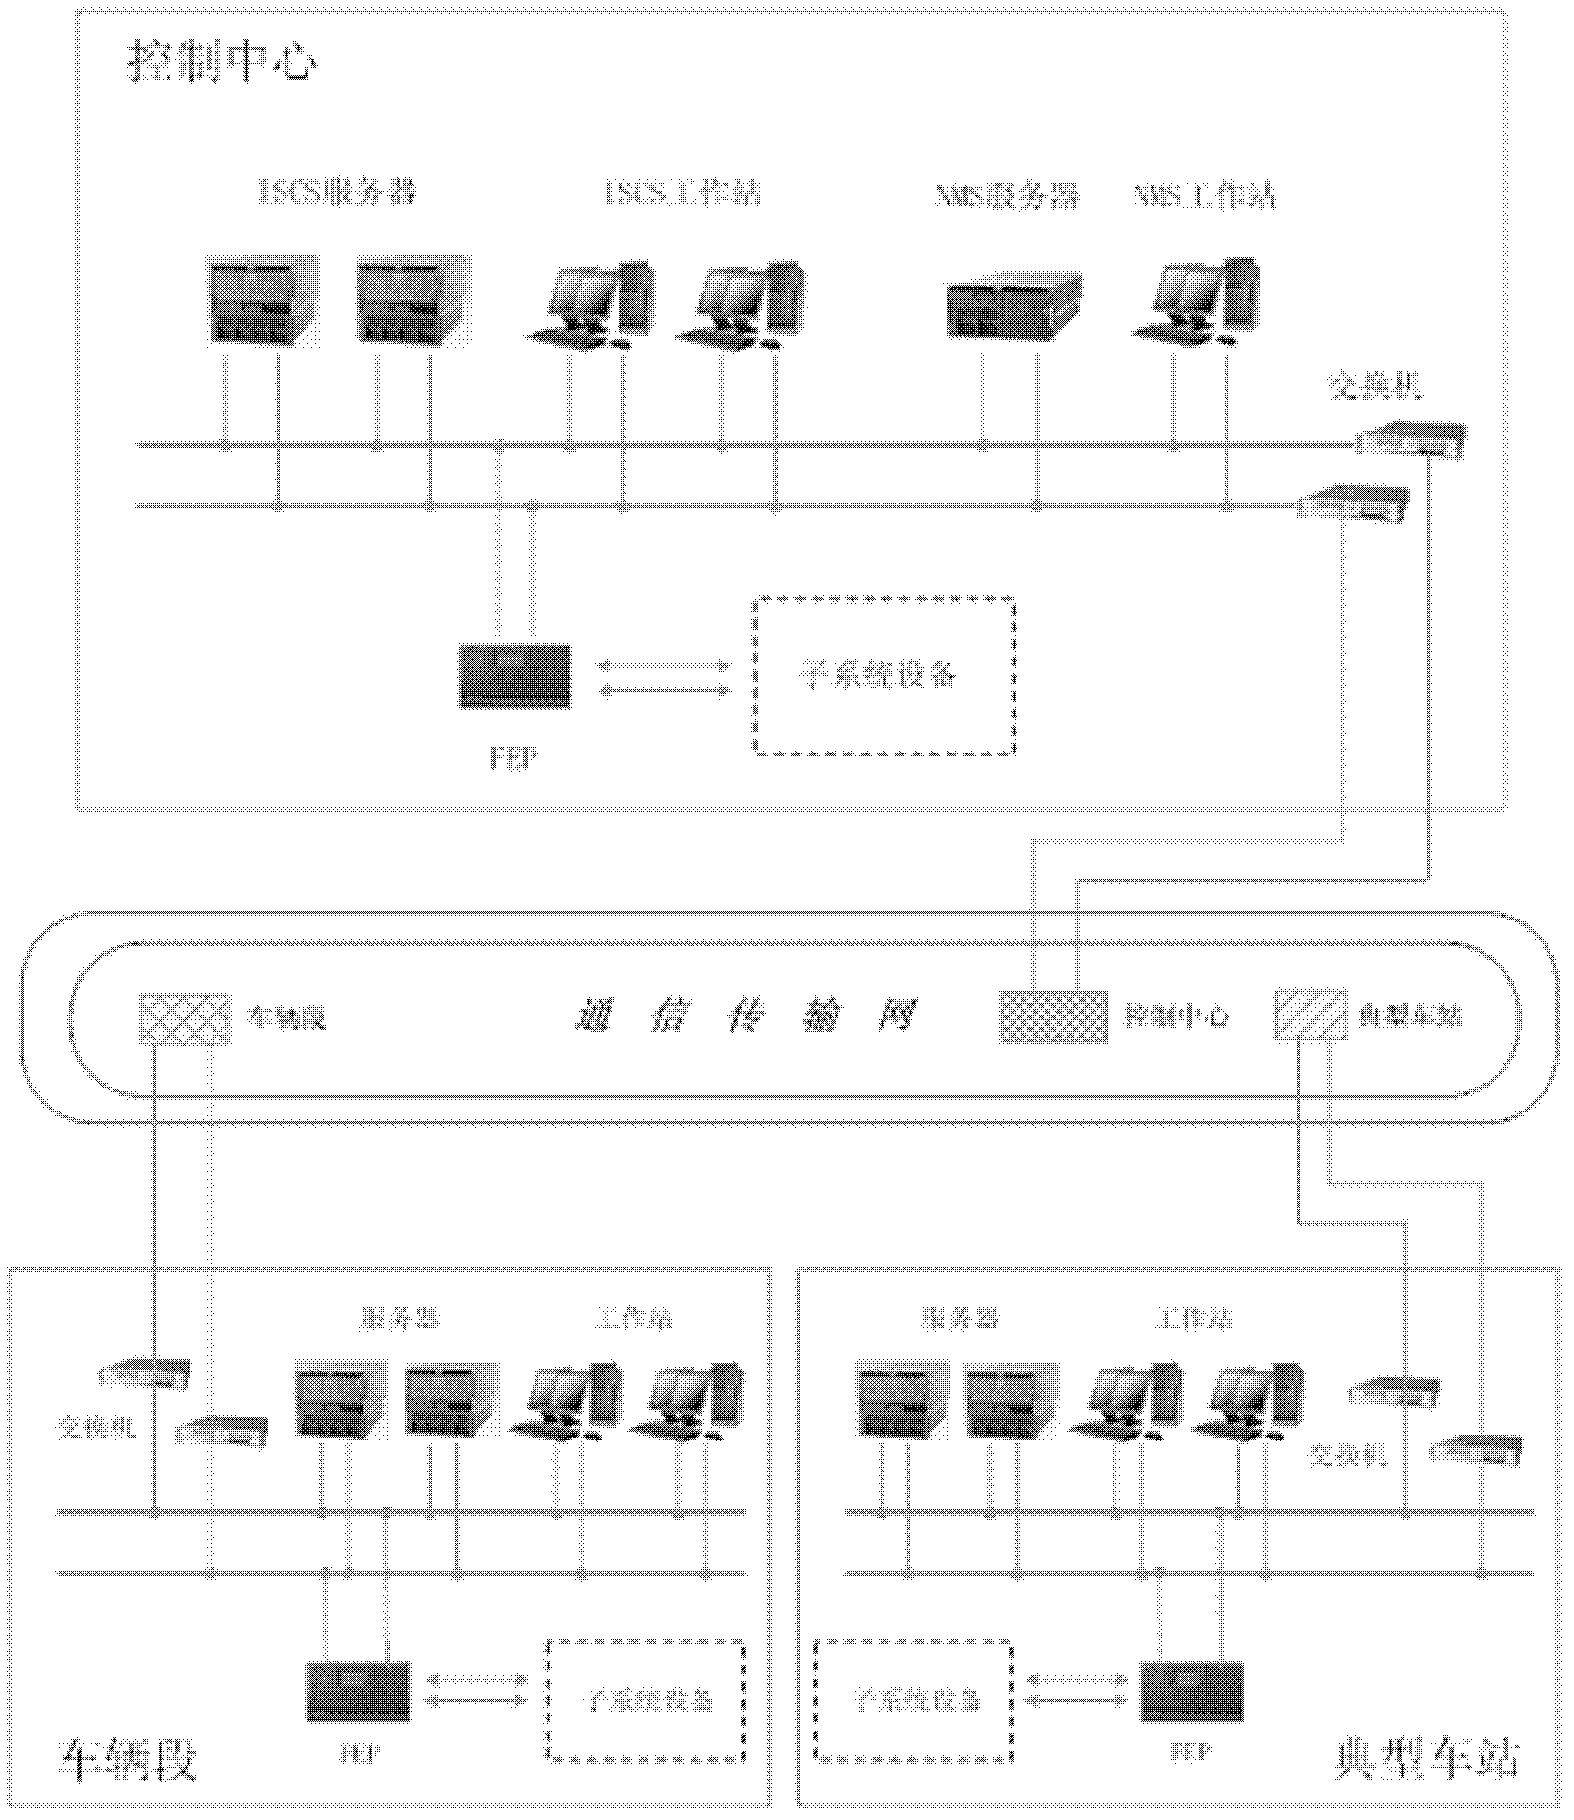 Comprehensive monitoring device for SNMP (Simple Network Management Protocol) and management method thereof